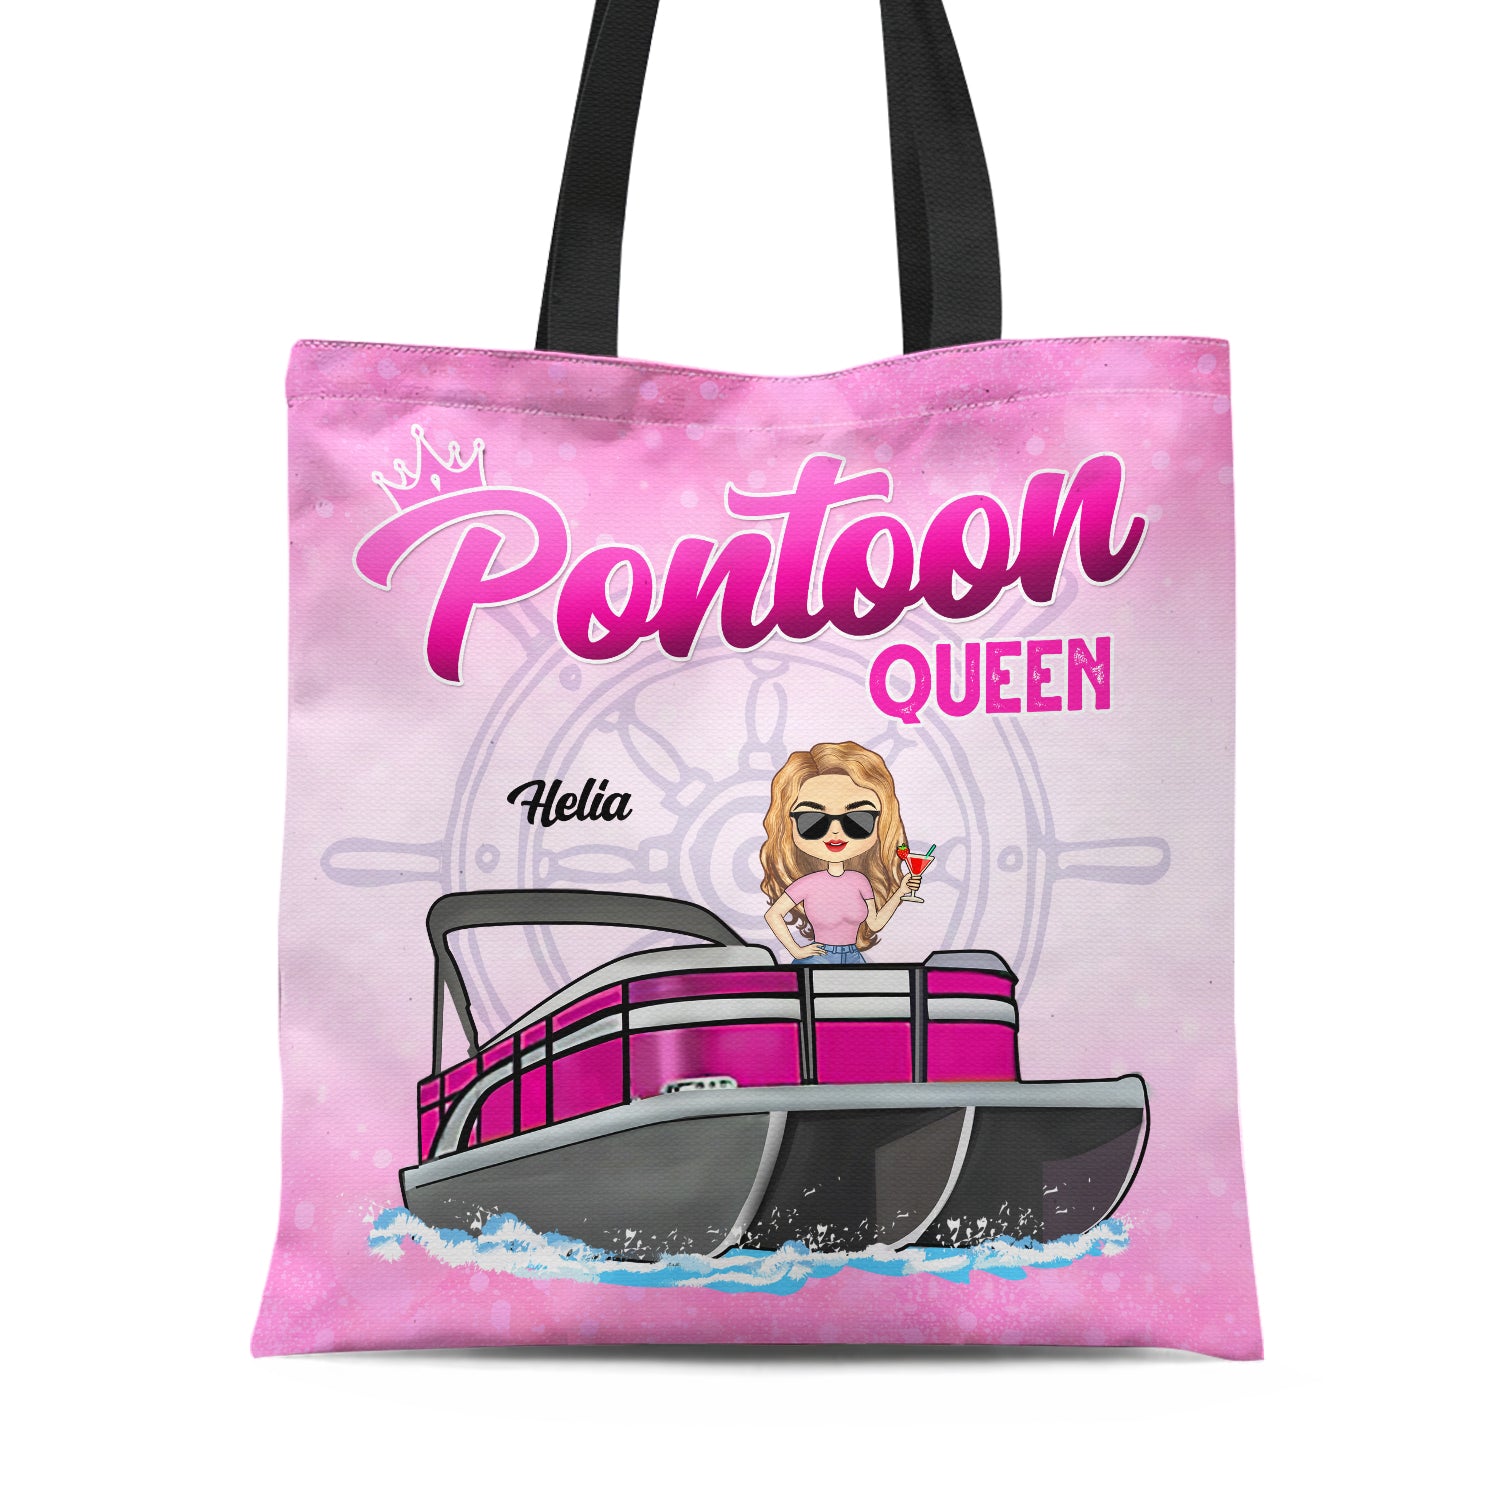 Boating Pontoon Queen - Traveling, Cruising Gift For Pontooning Lovers, Lake Lovers, Travelers, Women - Personalized Custom Zippered Canvas Bag